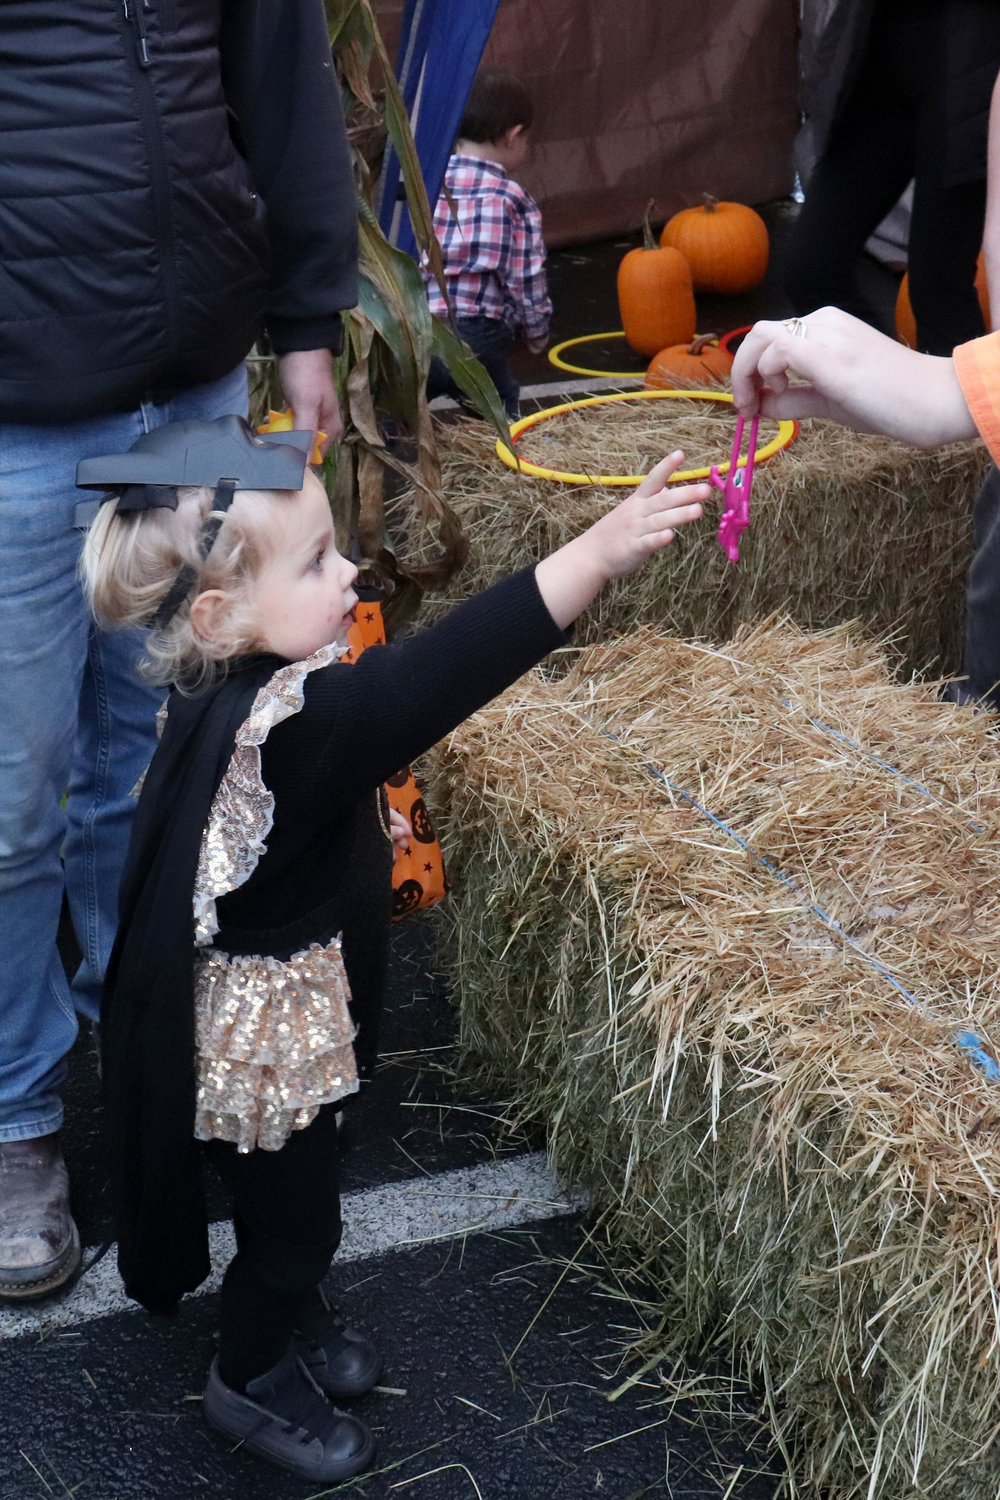 Reese accepts a prize after playing a bean bag toss game at Napavine Assembly of God Church’s trunk or treat event on Monday.